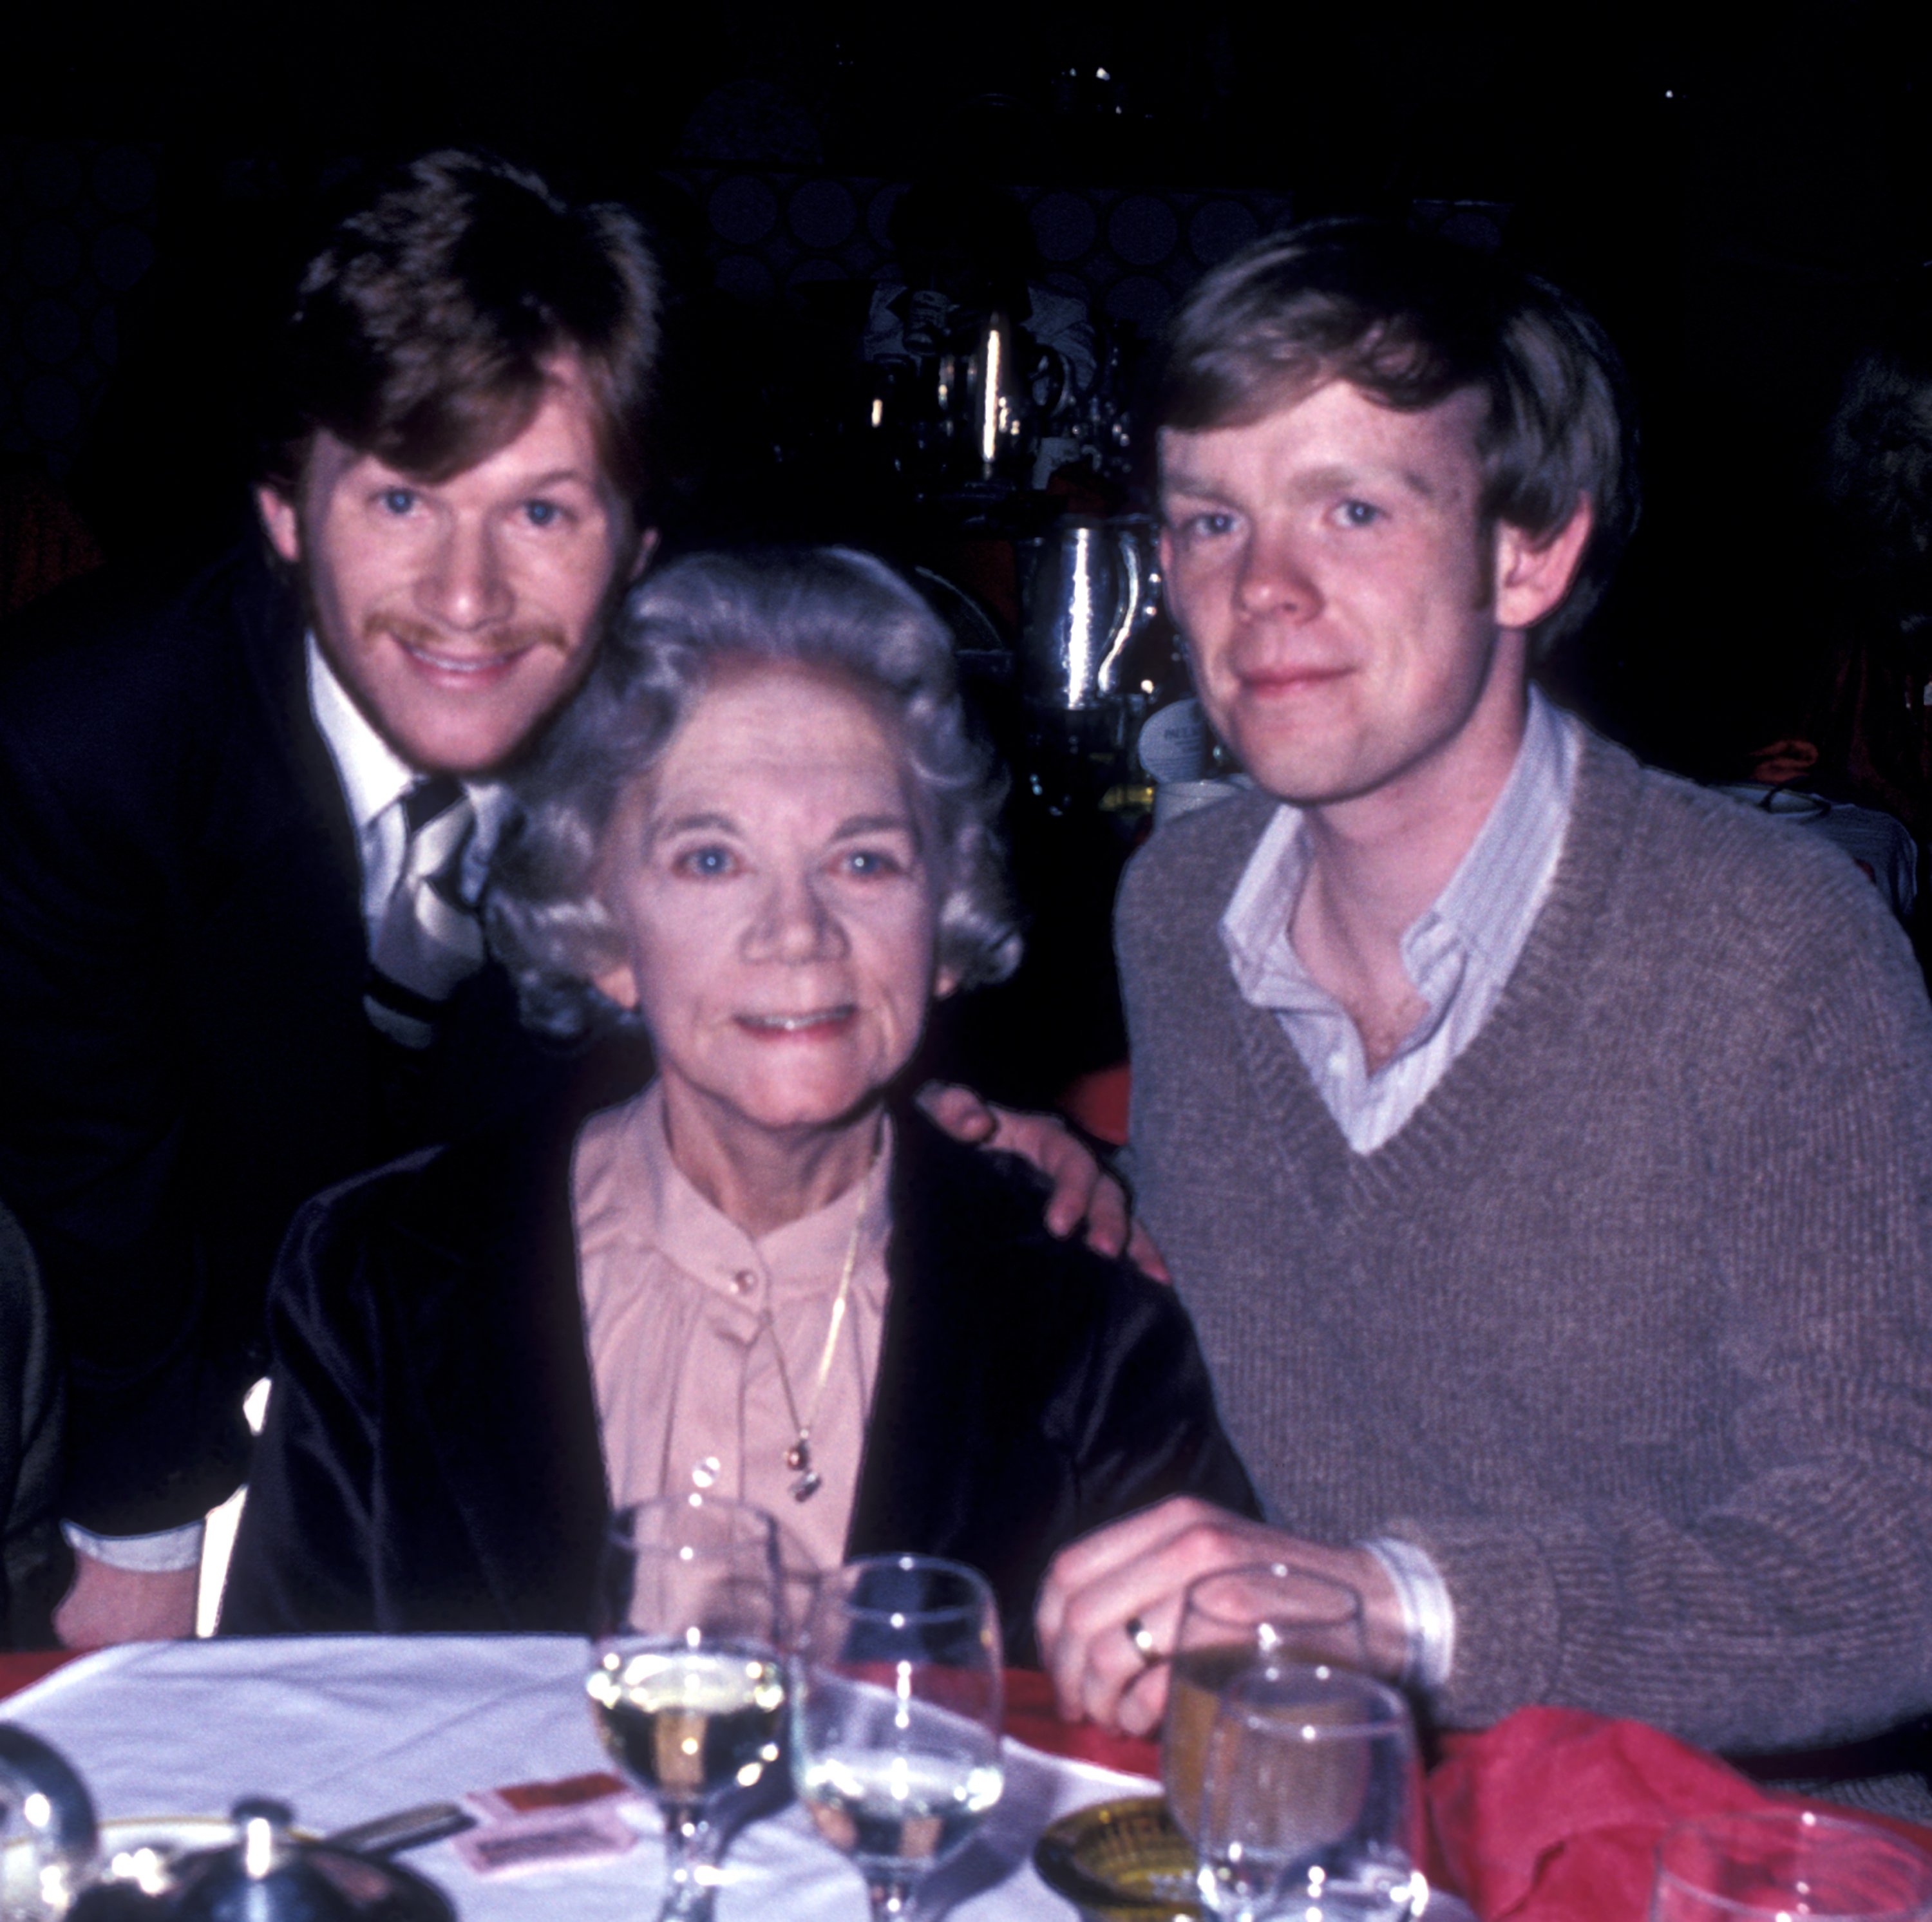 Actors Jon Walmsley, Ellen Corby and Eric Scott attending "The Waltons" Wrap Party at the Century Plaza Hotel on March 23, 1980 in Century City, California. / Source: Getty Images